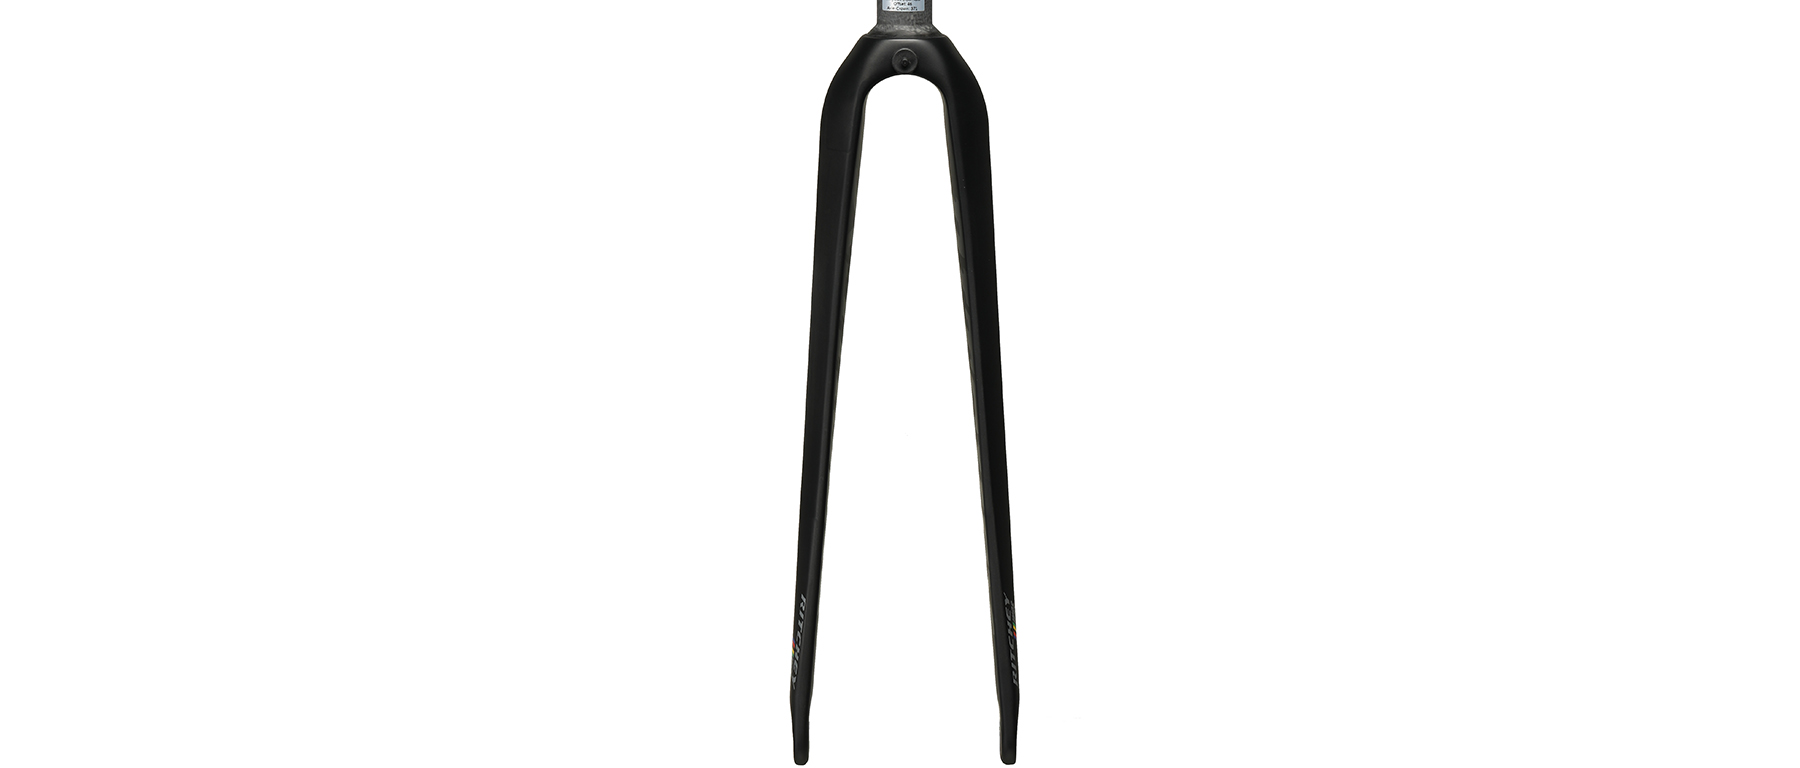 Ritchey WCS Carbon Road Fork